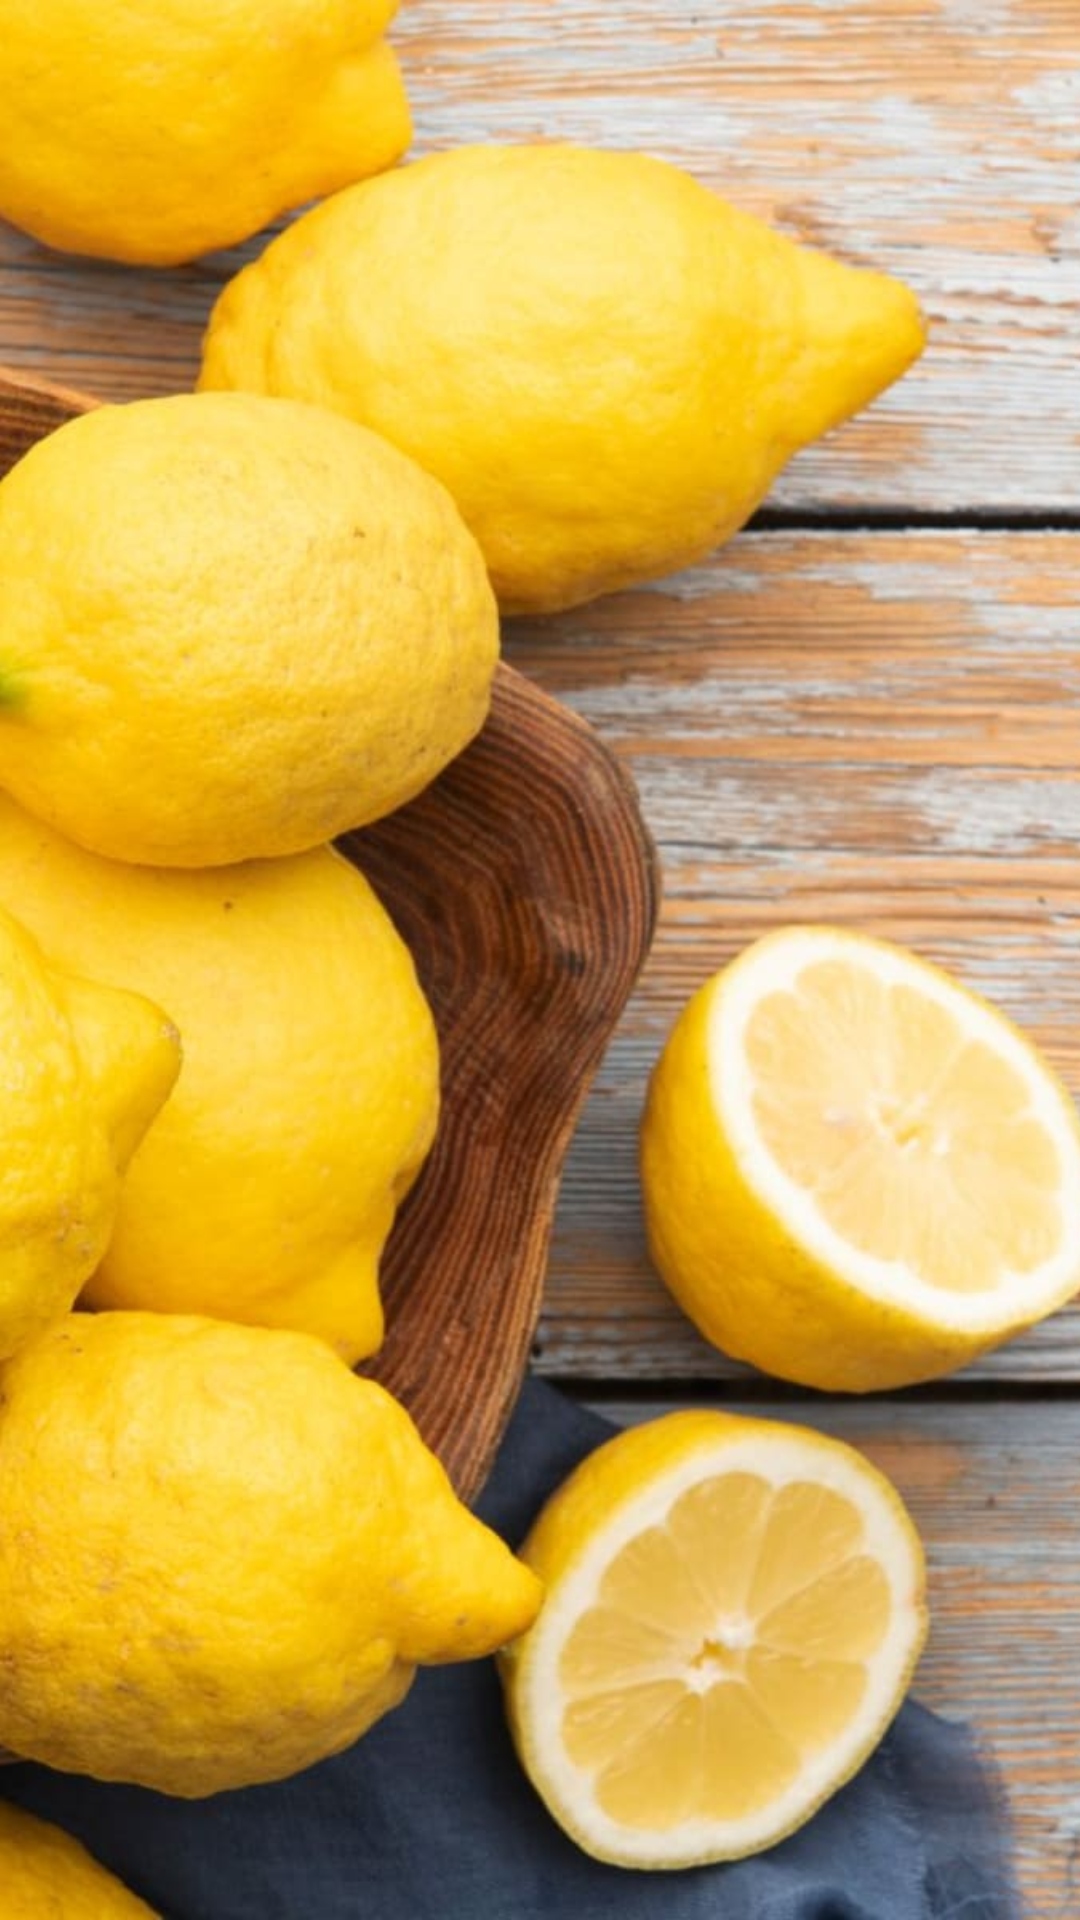 5 ways to add lemon to your diet for weight loss